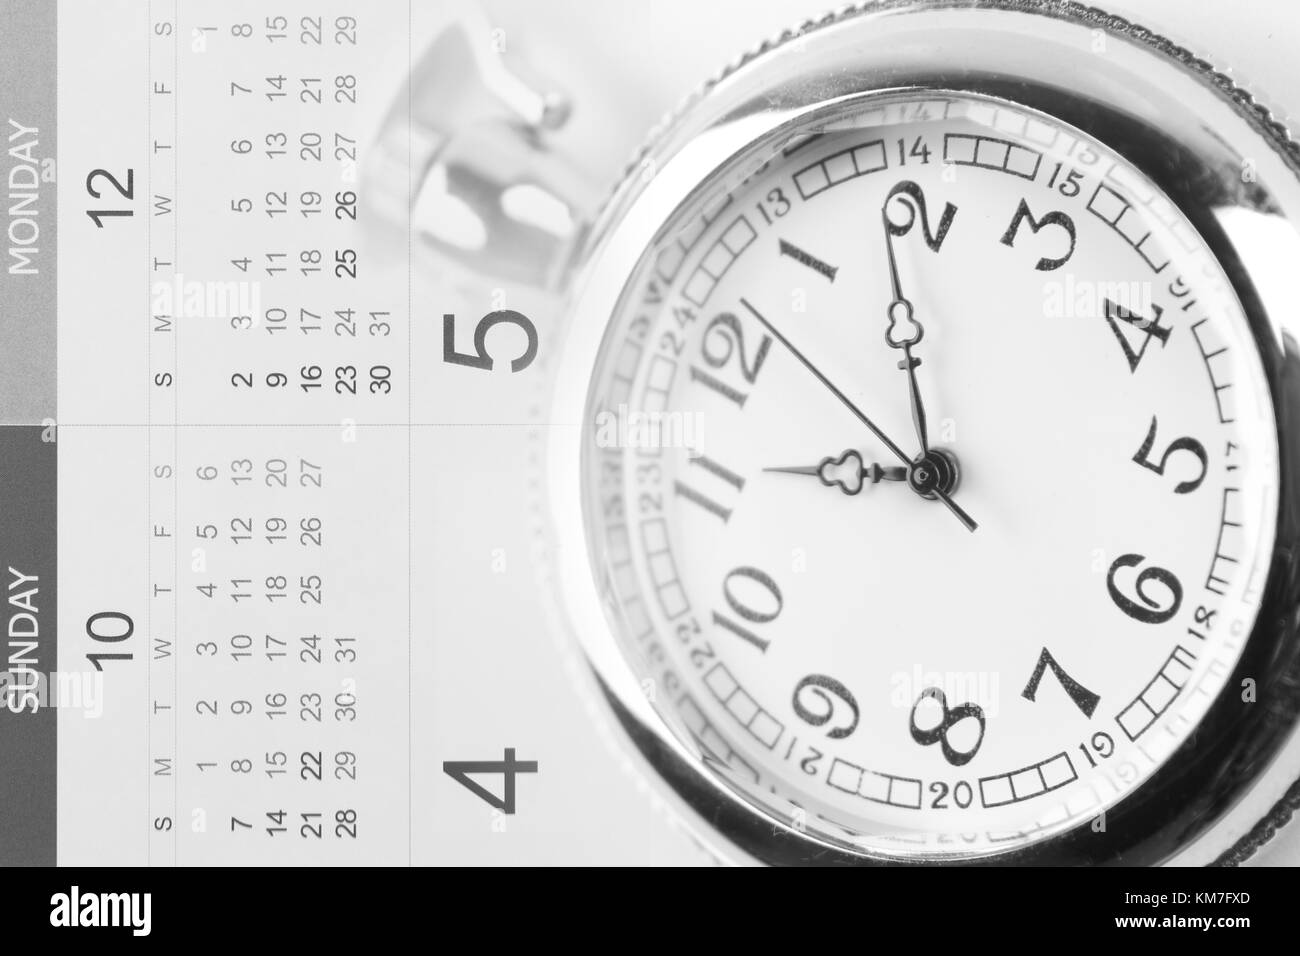 Watch on calendar page numbers Stock Photo